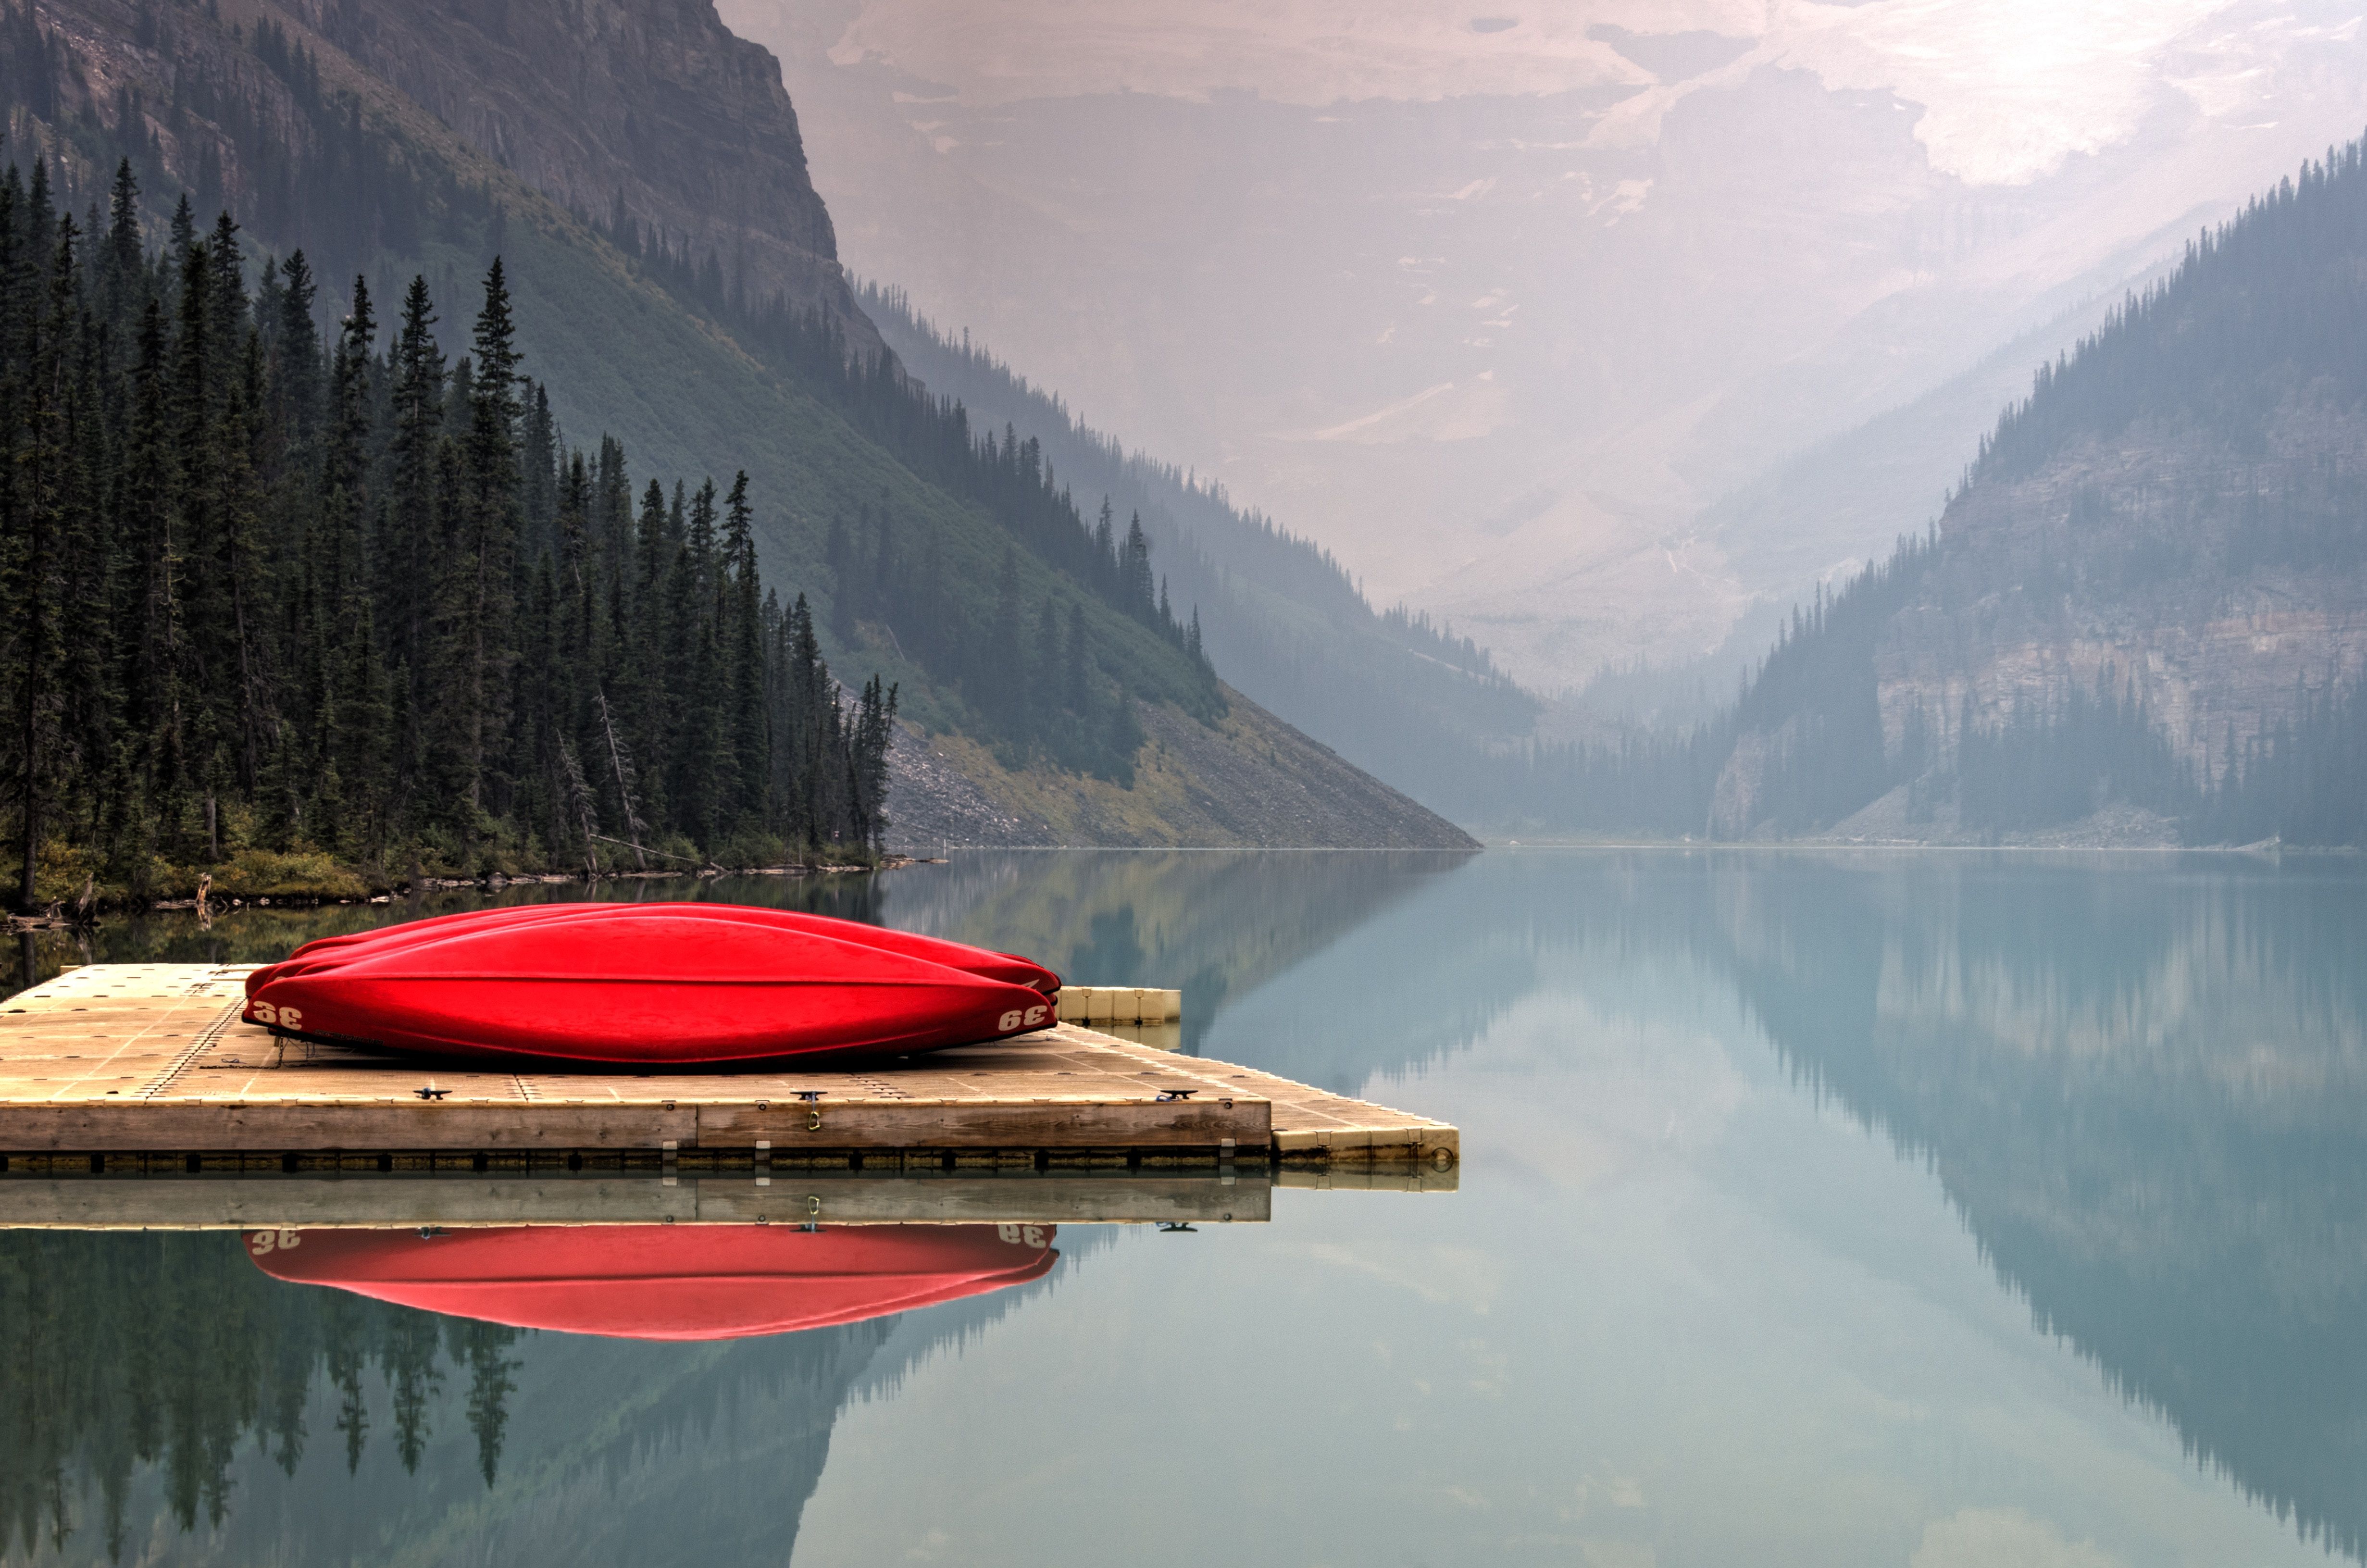 4924x3262 #wallpaper, #reflection, #lake, #cano, #wilderness, #forest, #nature wallpaper, #mountain, #peaceful, #nature background, #dock, #lake louise, #boat, #Creative Commons image, #mountain range, #kayak, #red kayak, #red, #canoe, #tree